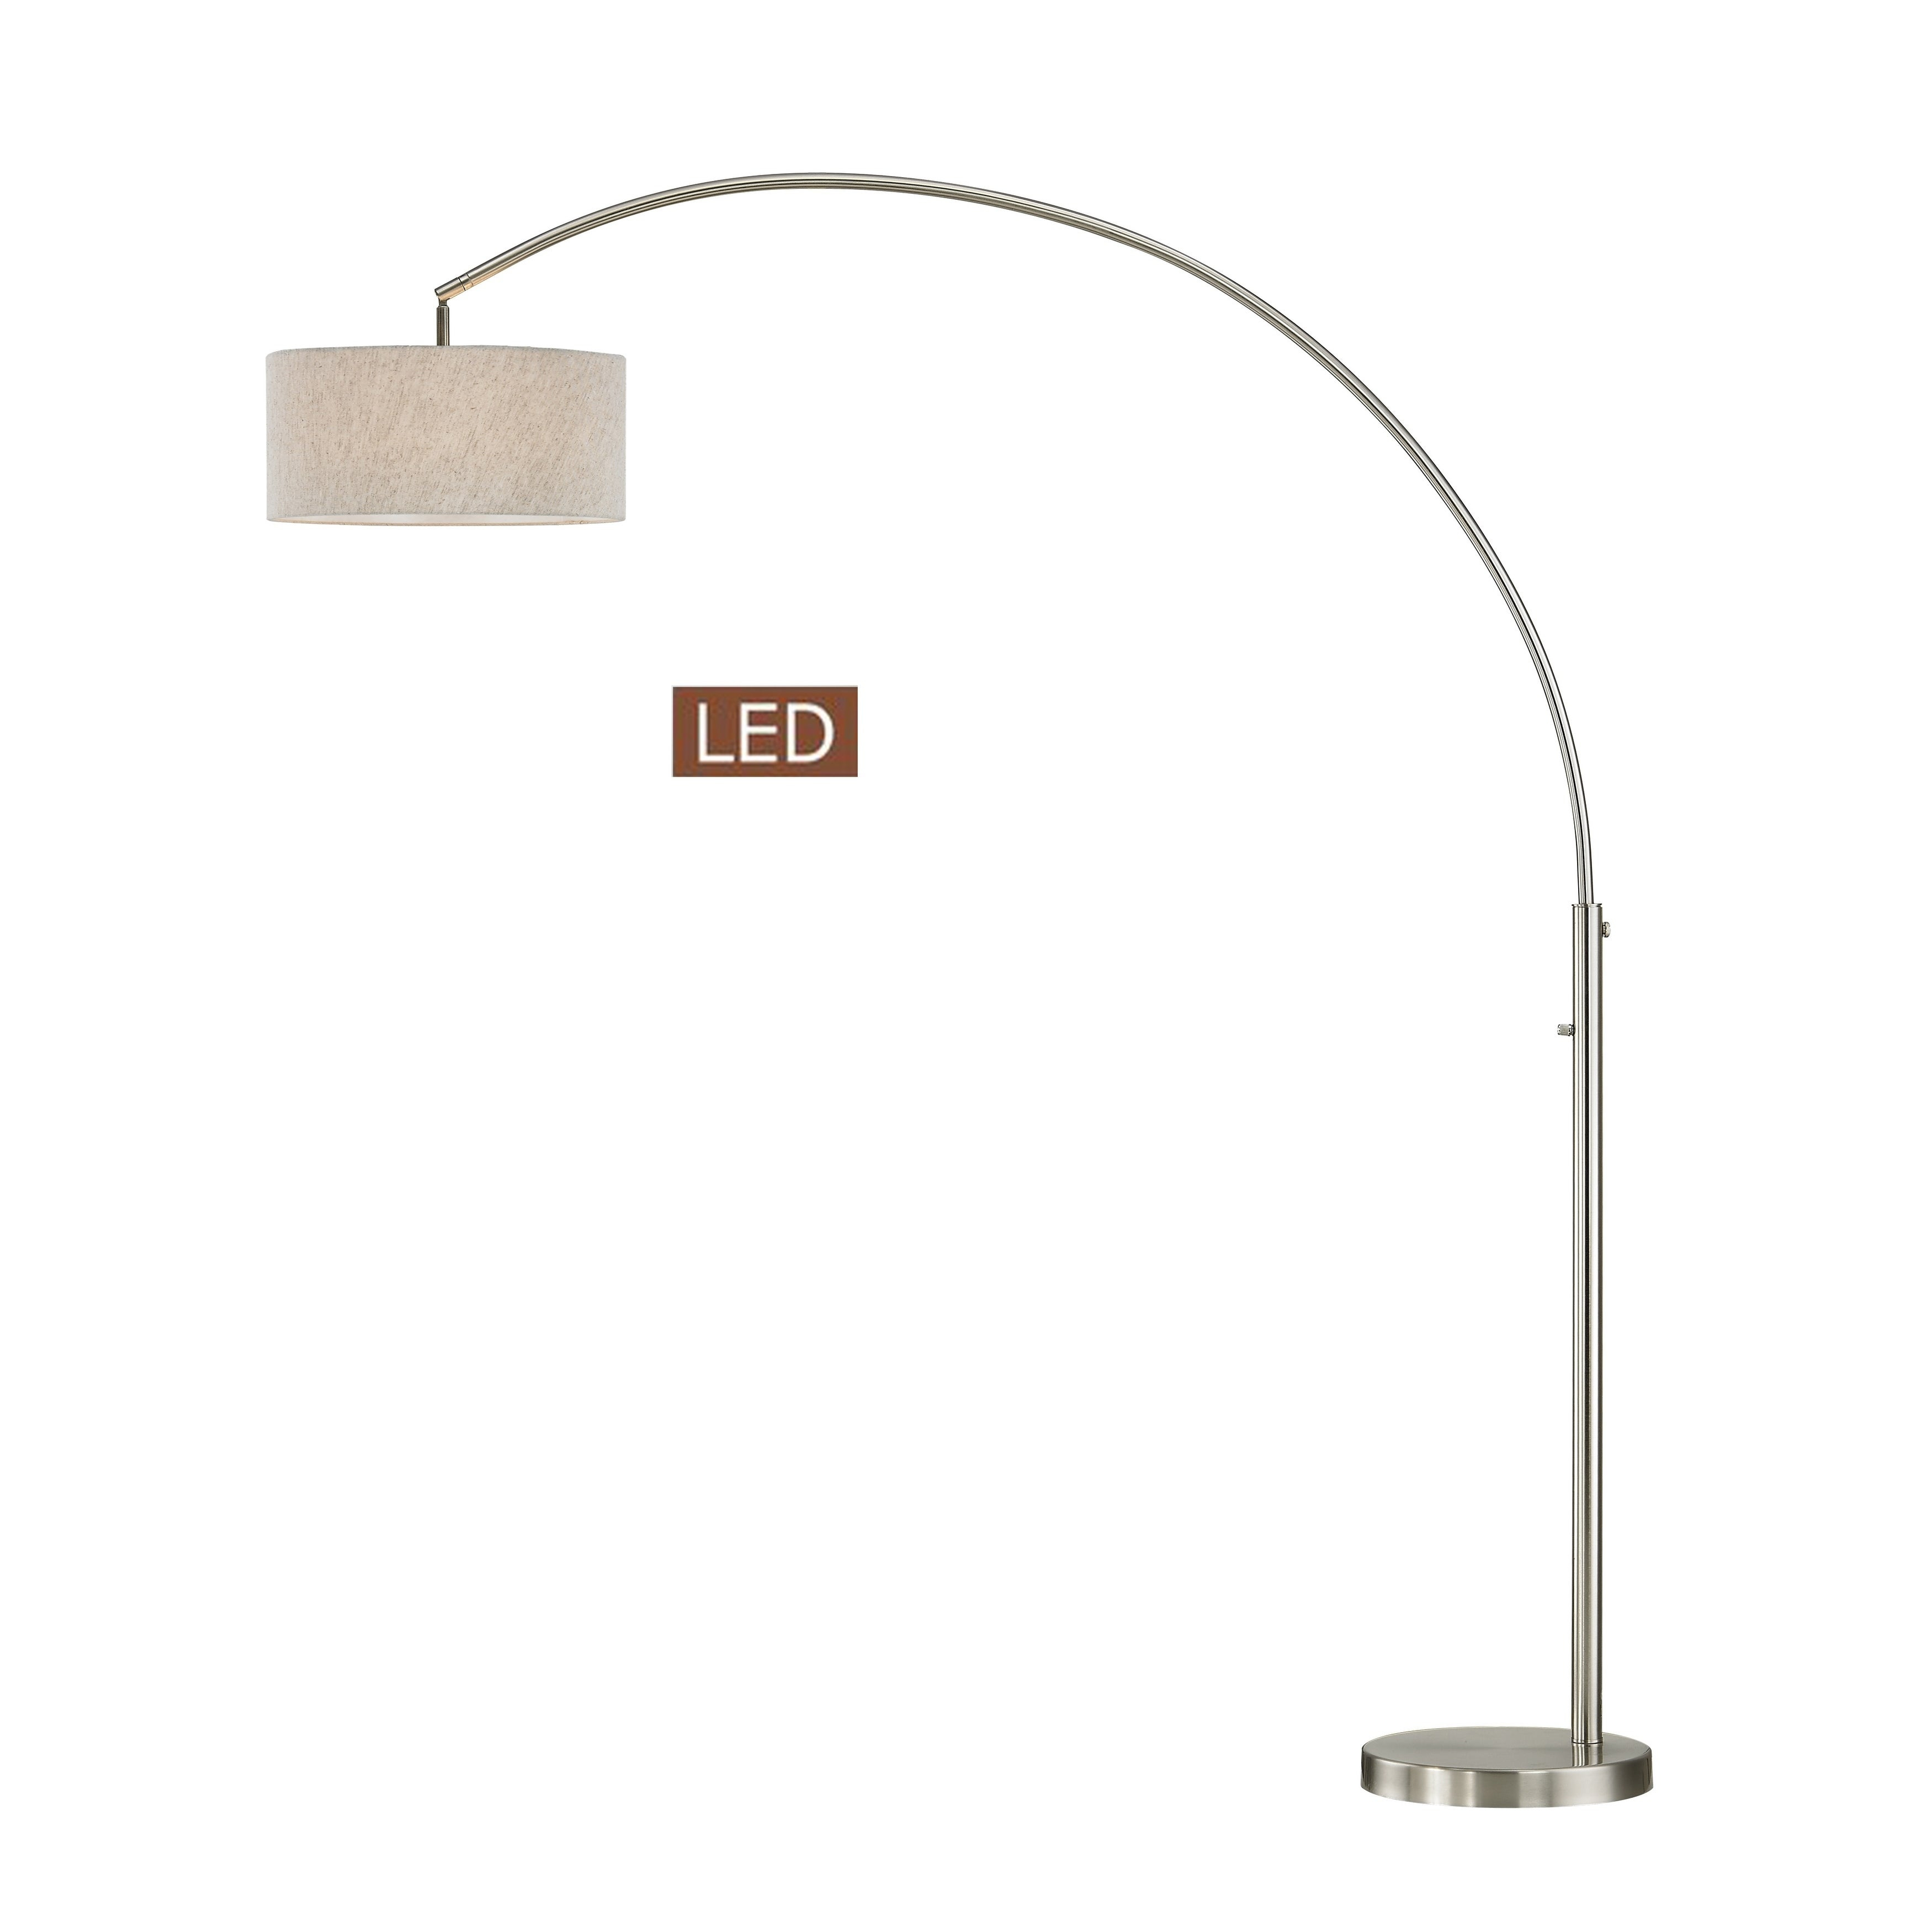 Details About Artiva Usa Elena Brushed Steel Chrome 80 Inch Led Arch Floor Lamp With Dimmer throughout size 3500 X 3500